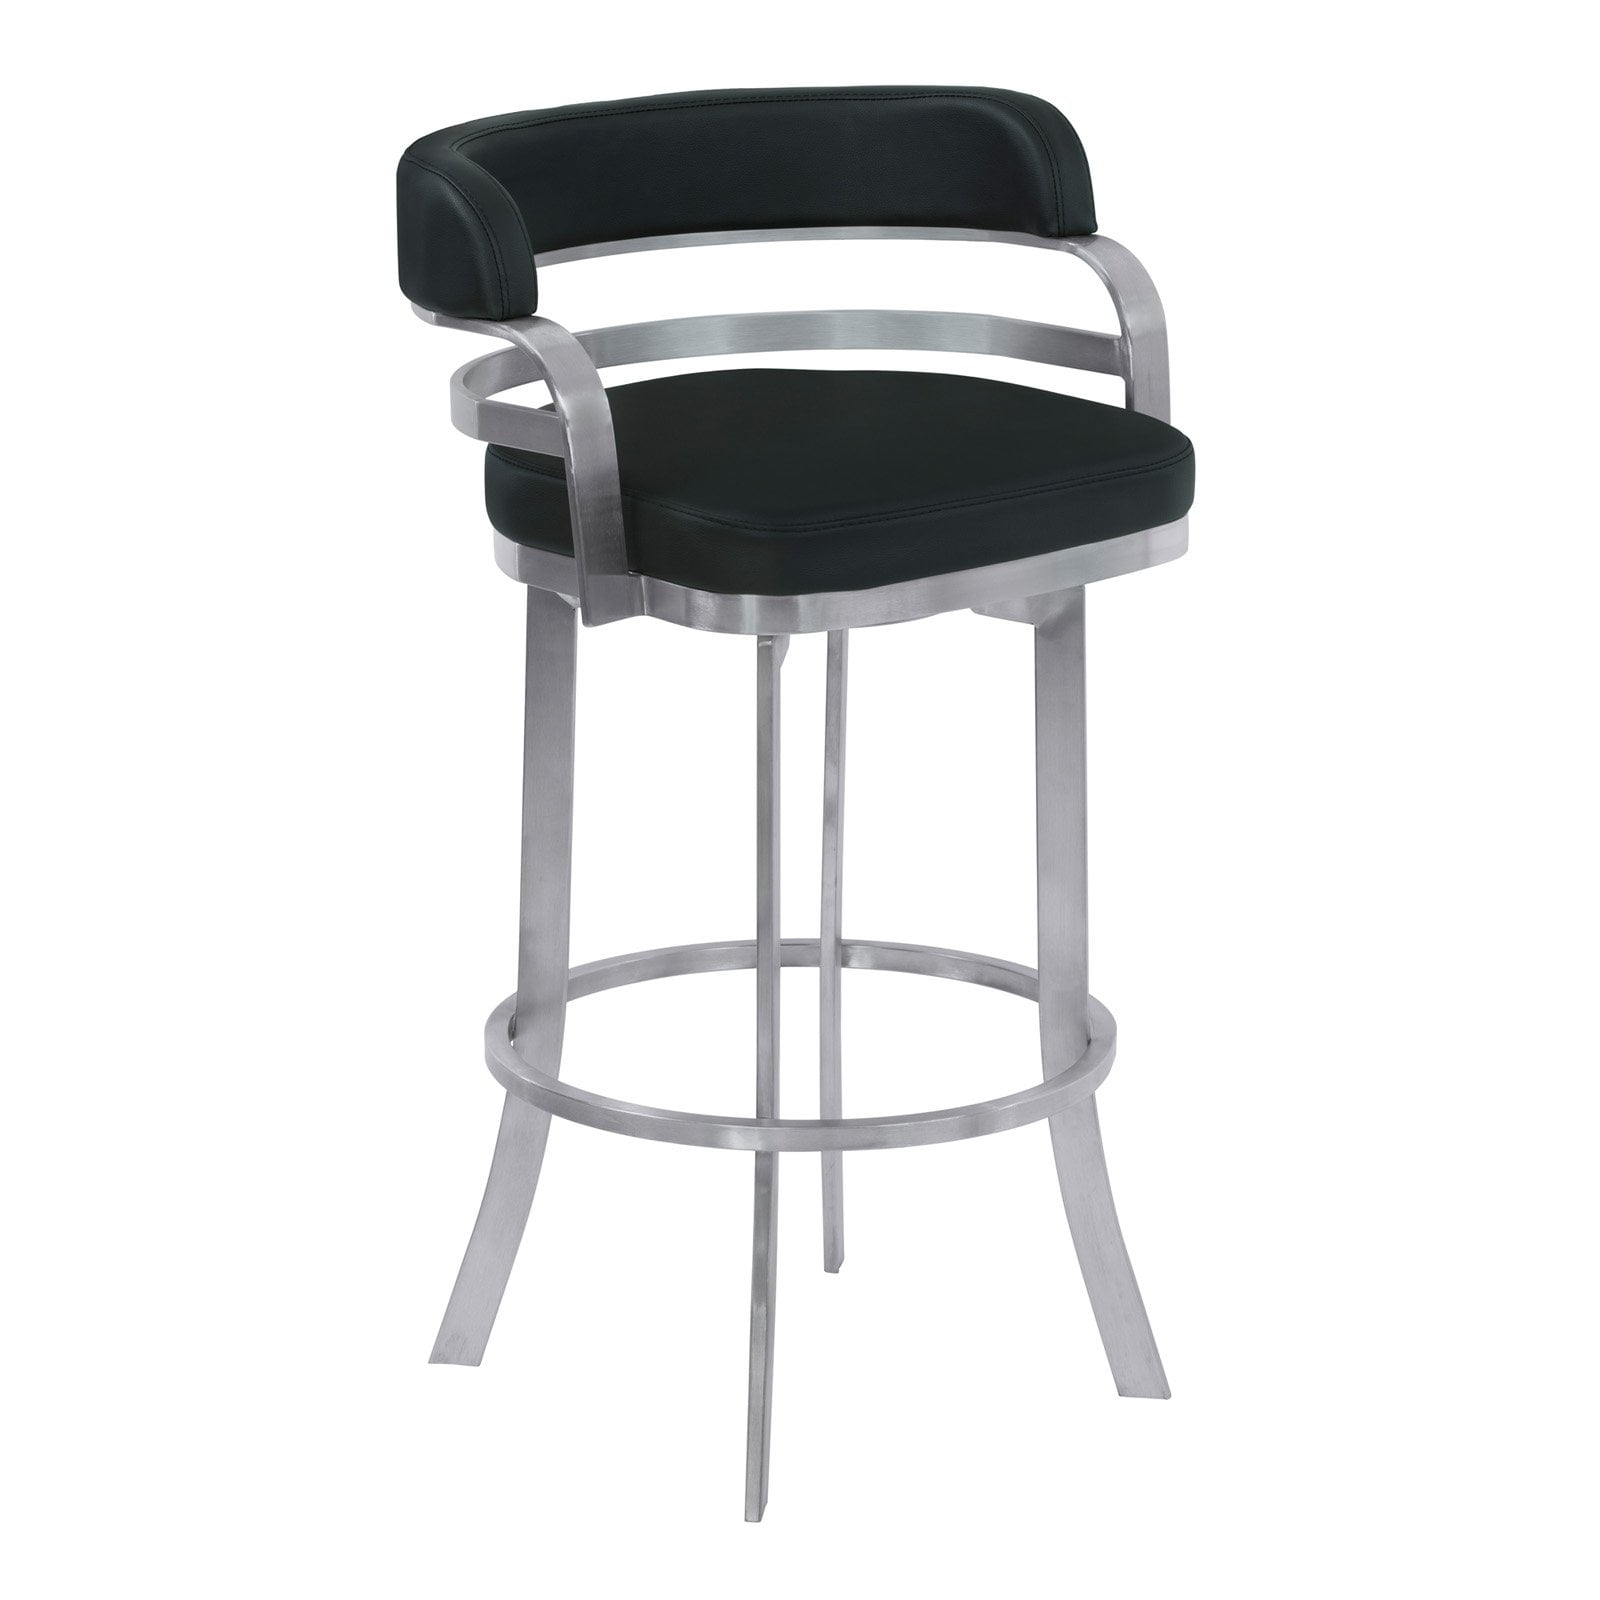 Picture of Armen Living LCPRBABLBS30 37.8 x 22 x 22.05 in. 30 in. Prinz Bar Height Metal Swivel Barstool, Black Faux Leather with Brushed Stainless Steel